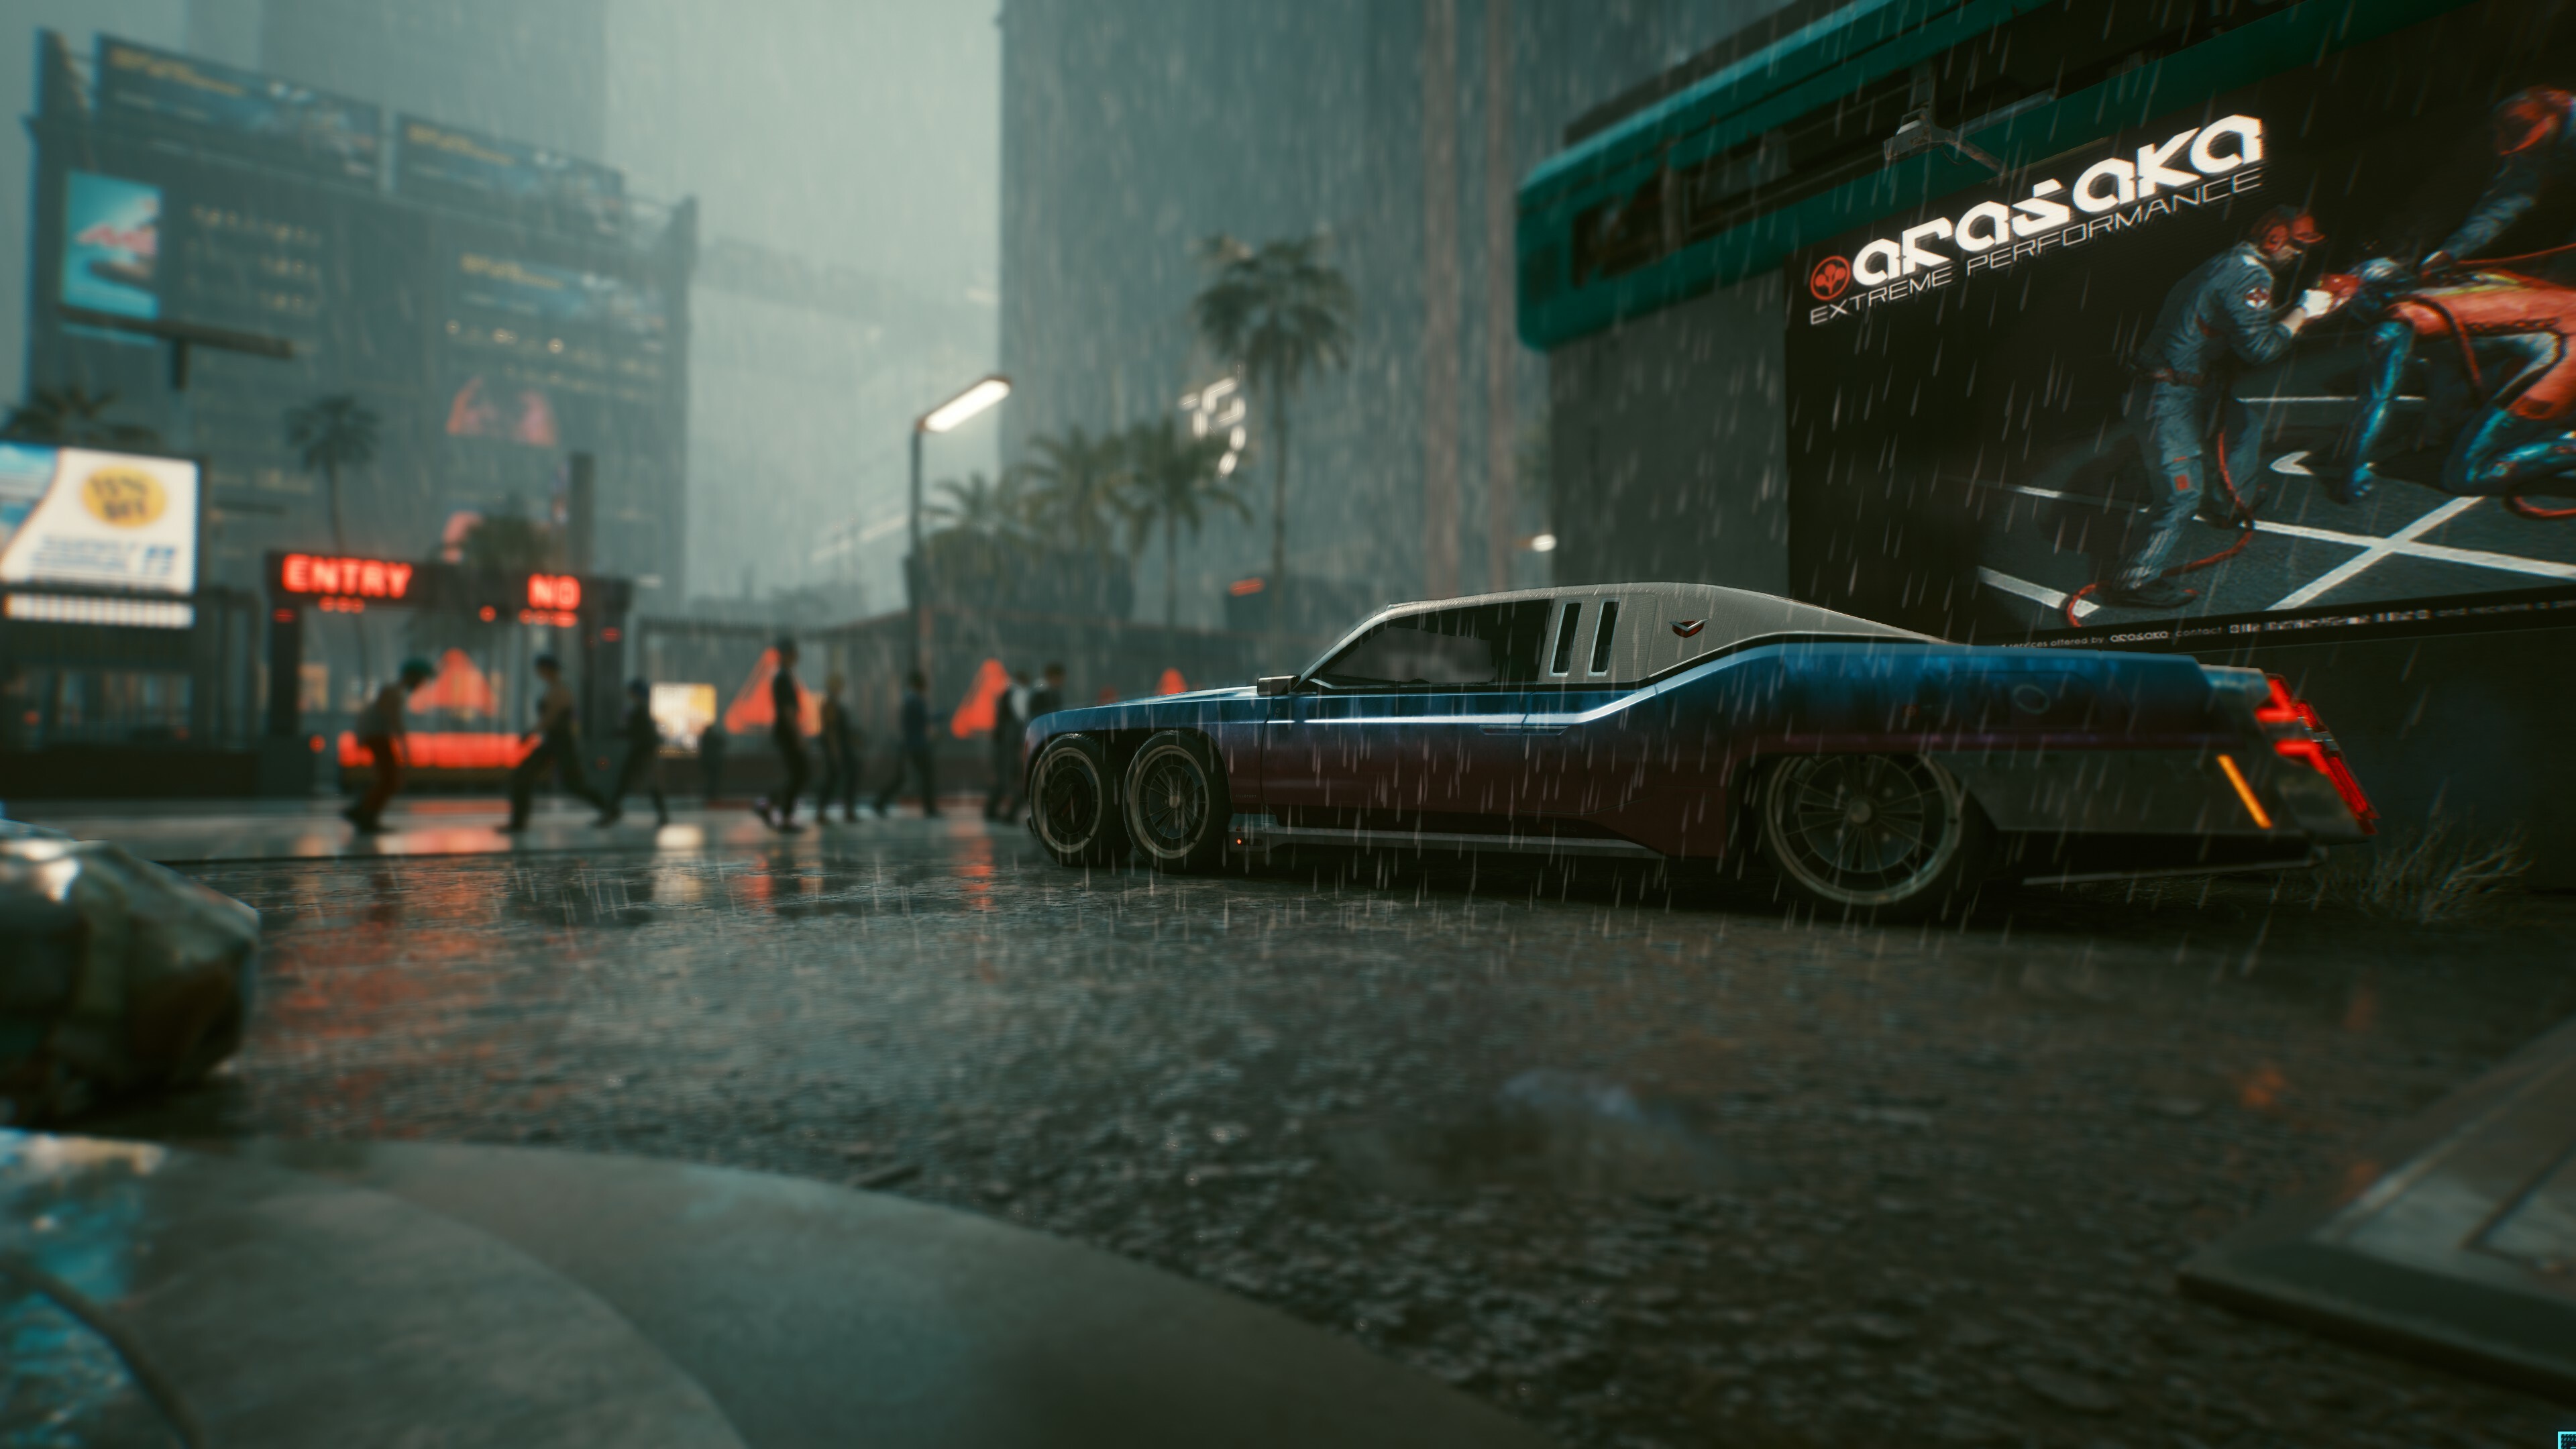 Cyberpunk 2077: It received praise from critics for its narrative, setting, and graphics, Futuristic, Video game. 3840x2160 4K Wallpaper.